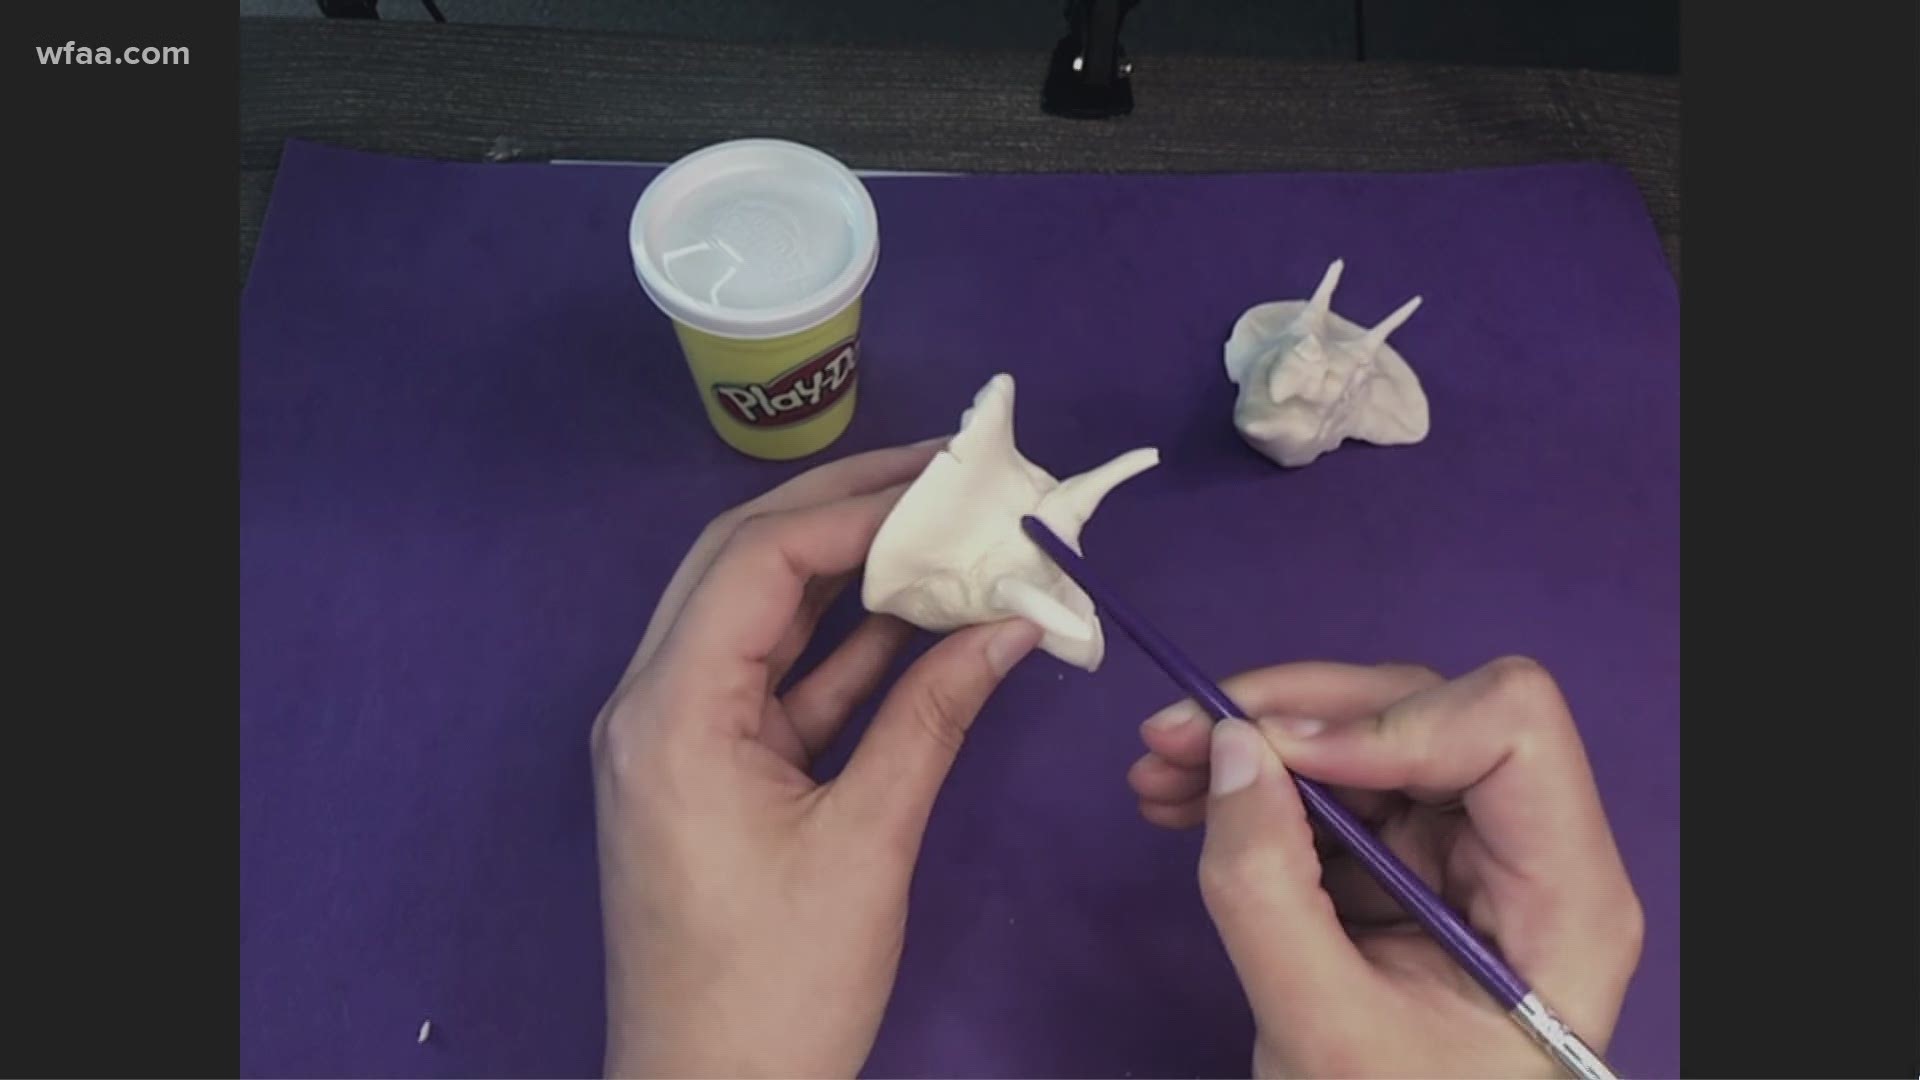 Play-Doh is perfect for sculpting your favorite dinosaur. It even has a texture like a fossil.